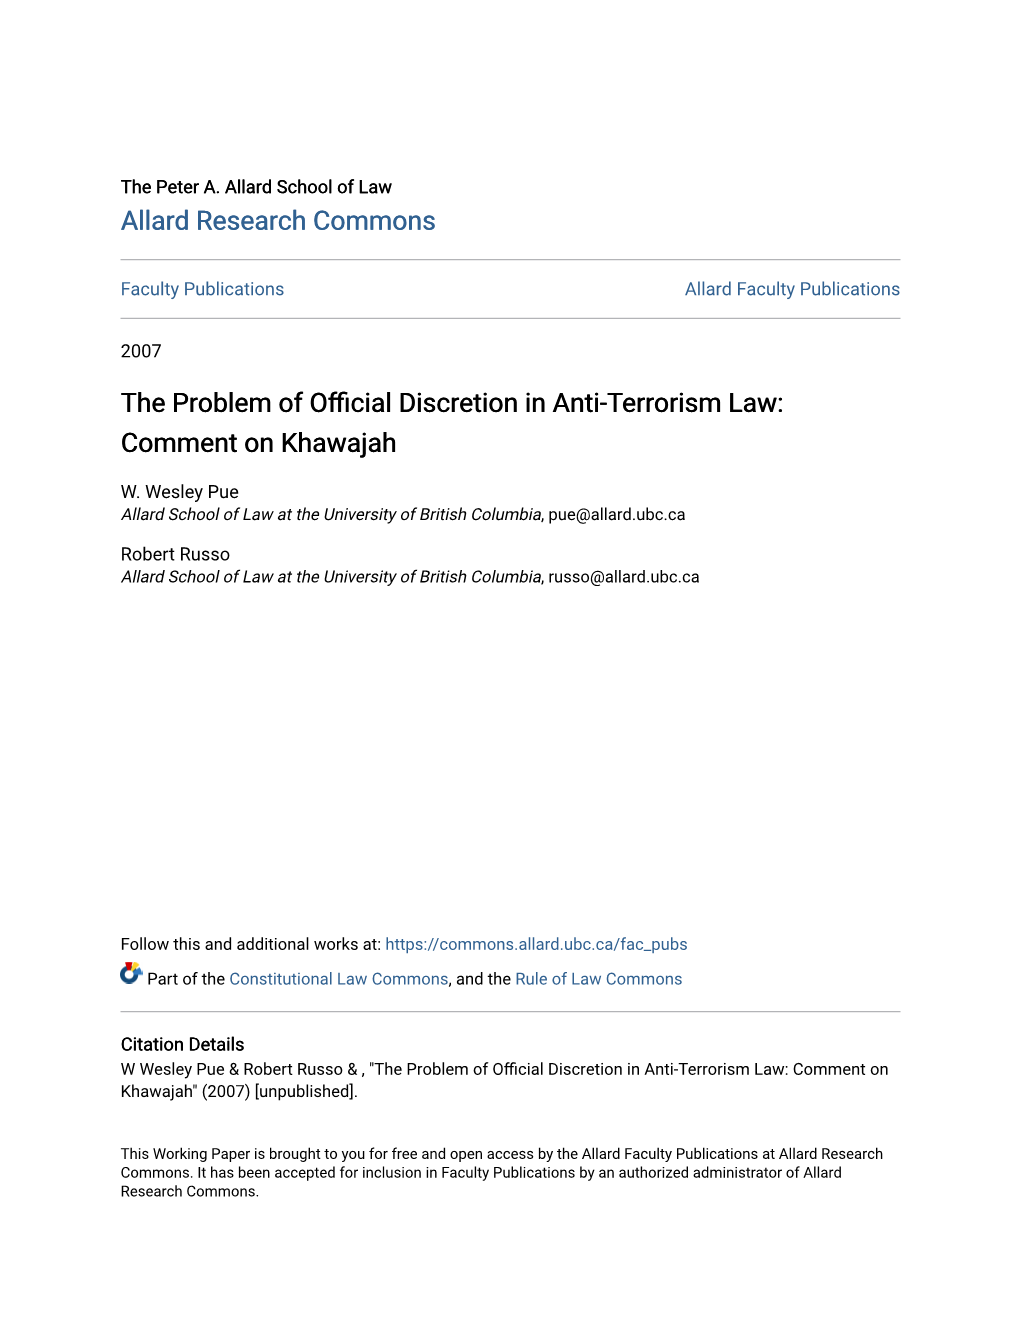 The Problem of Official Discretion in Anti-Terrorism Law: Comment on Khawajah